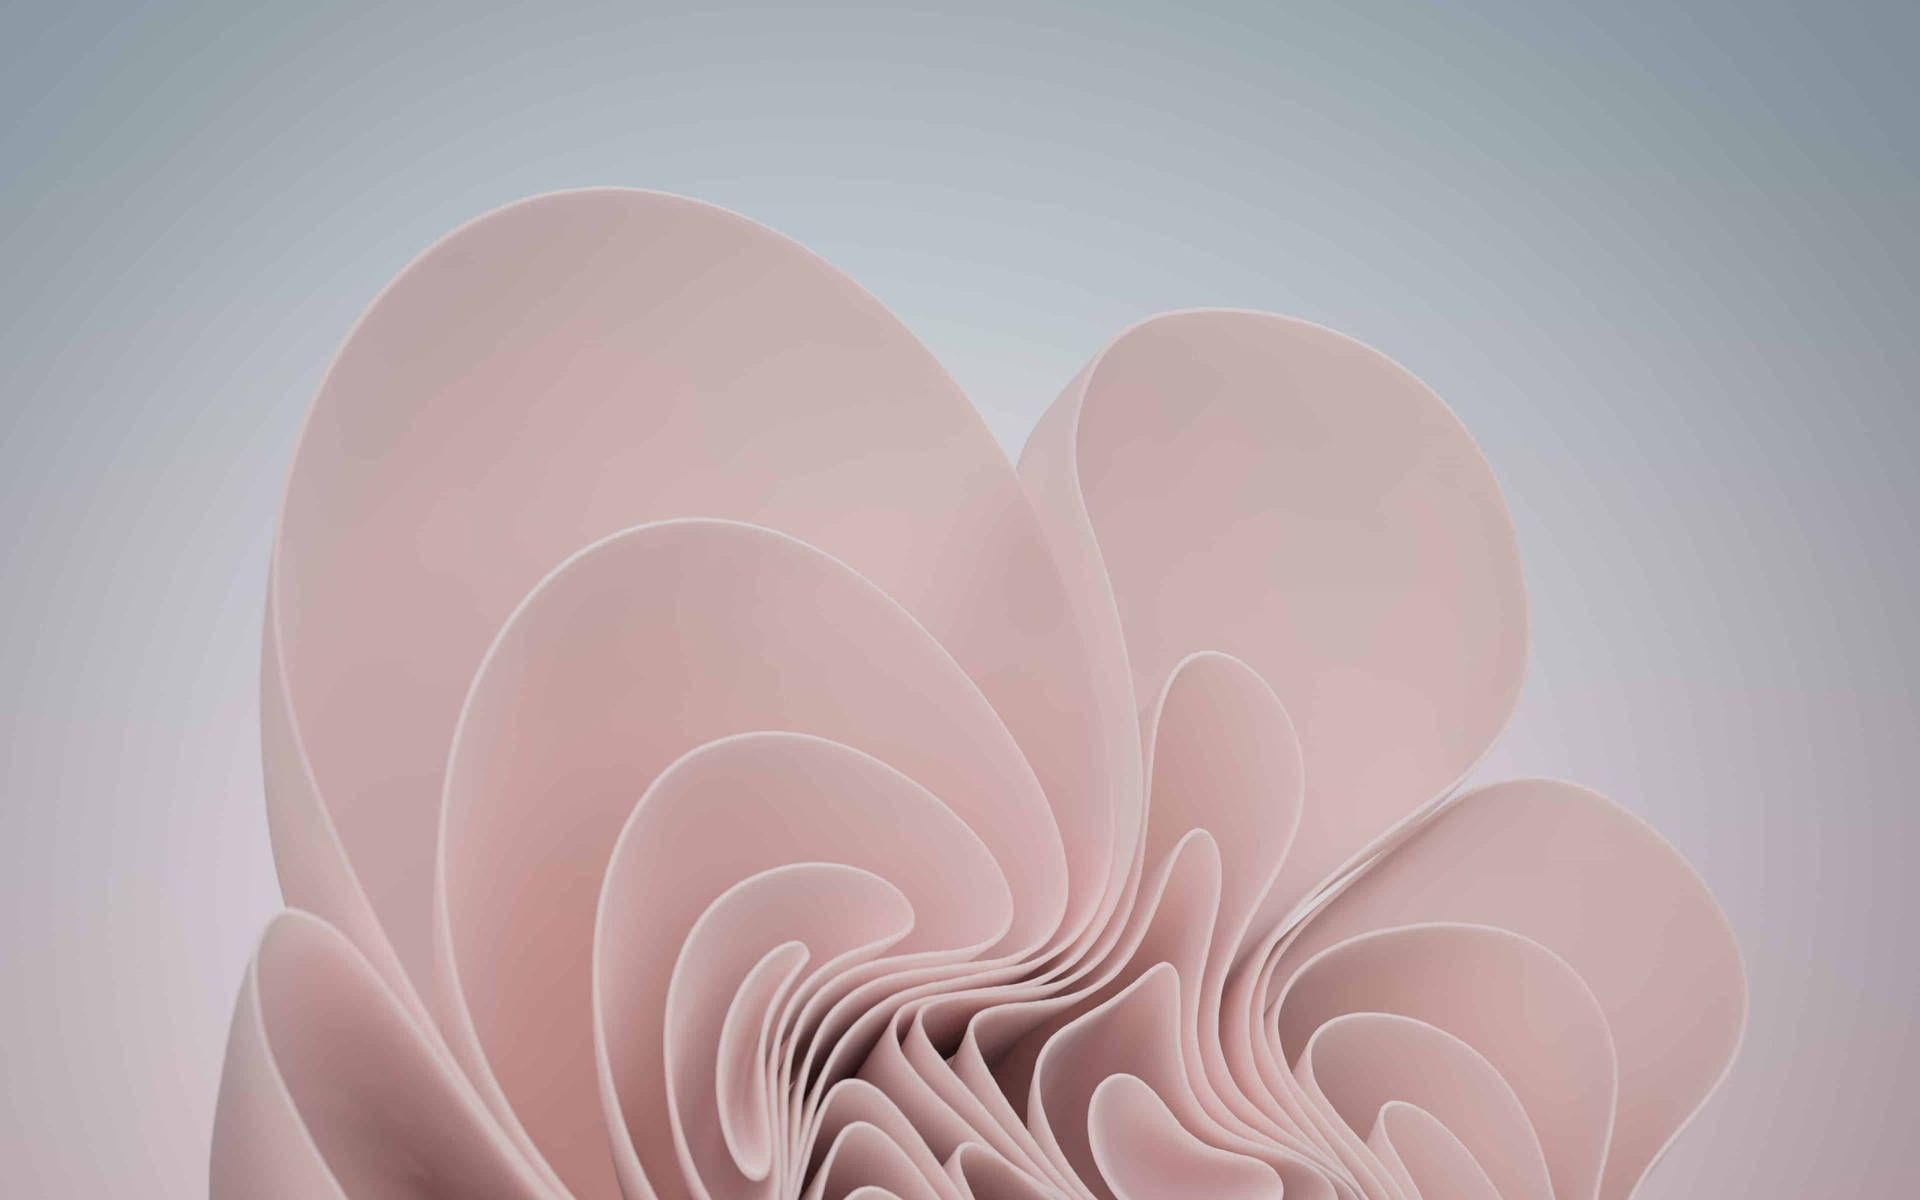 A pink abstract sculpture made of paper, resembling a flower. - Windows 11